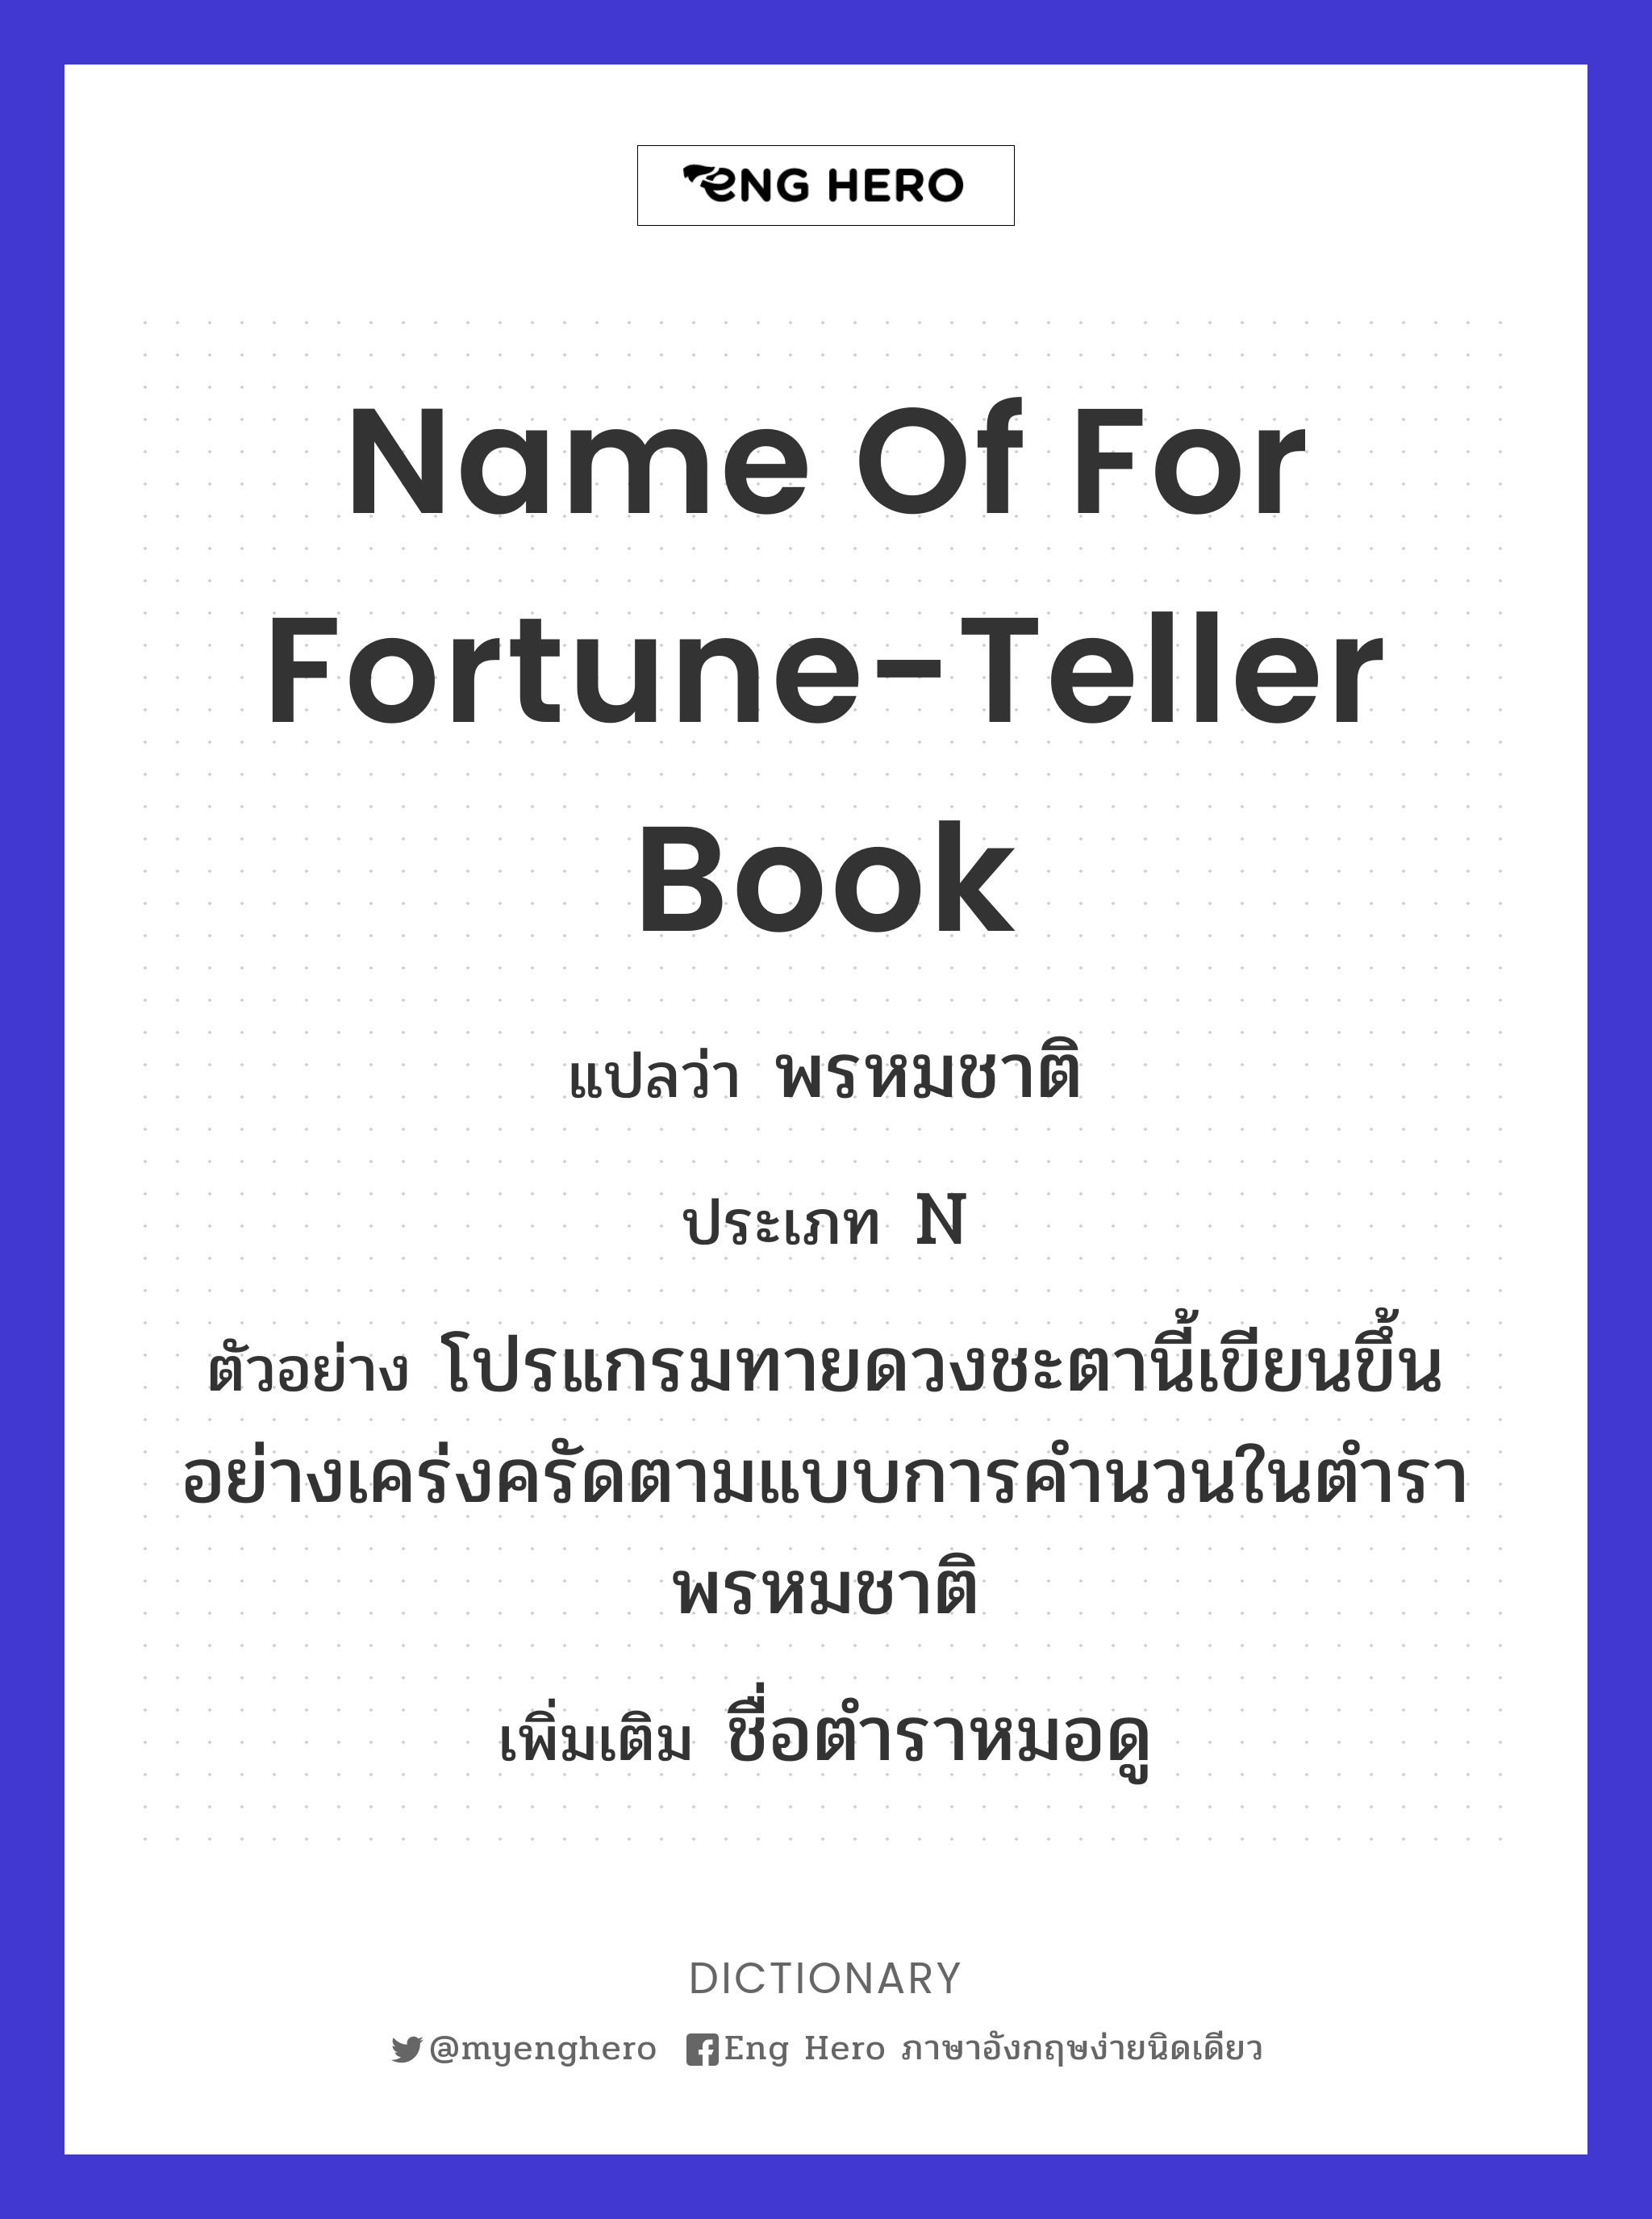 name of for fortune-teller book